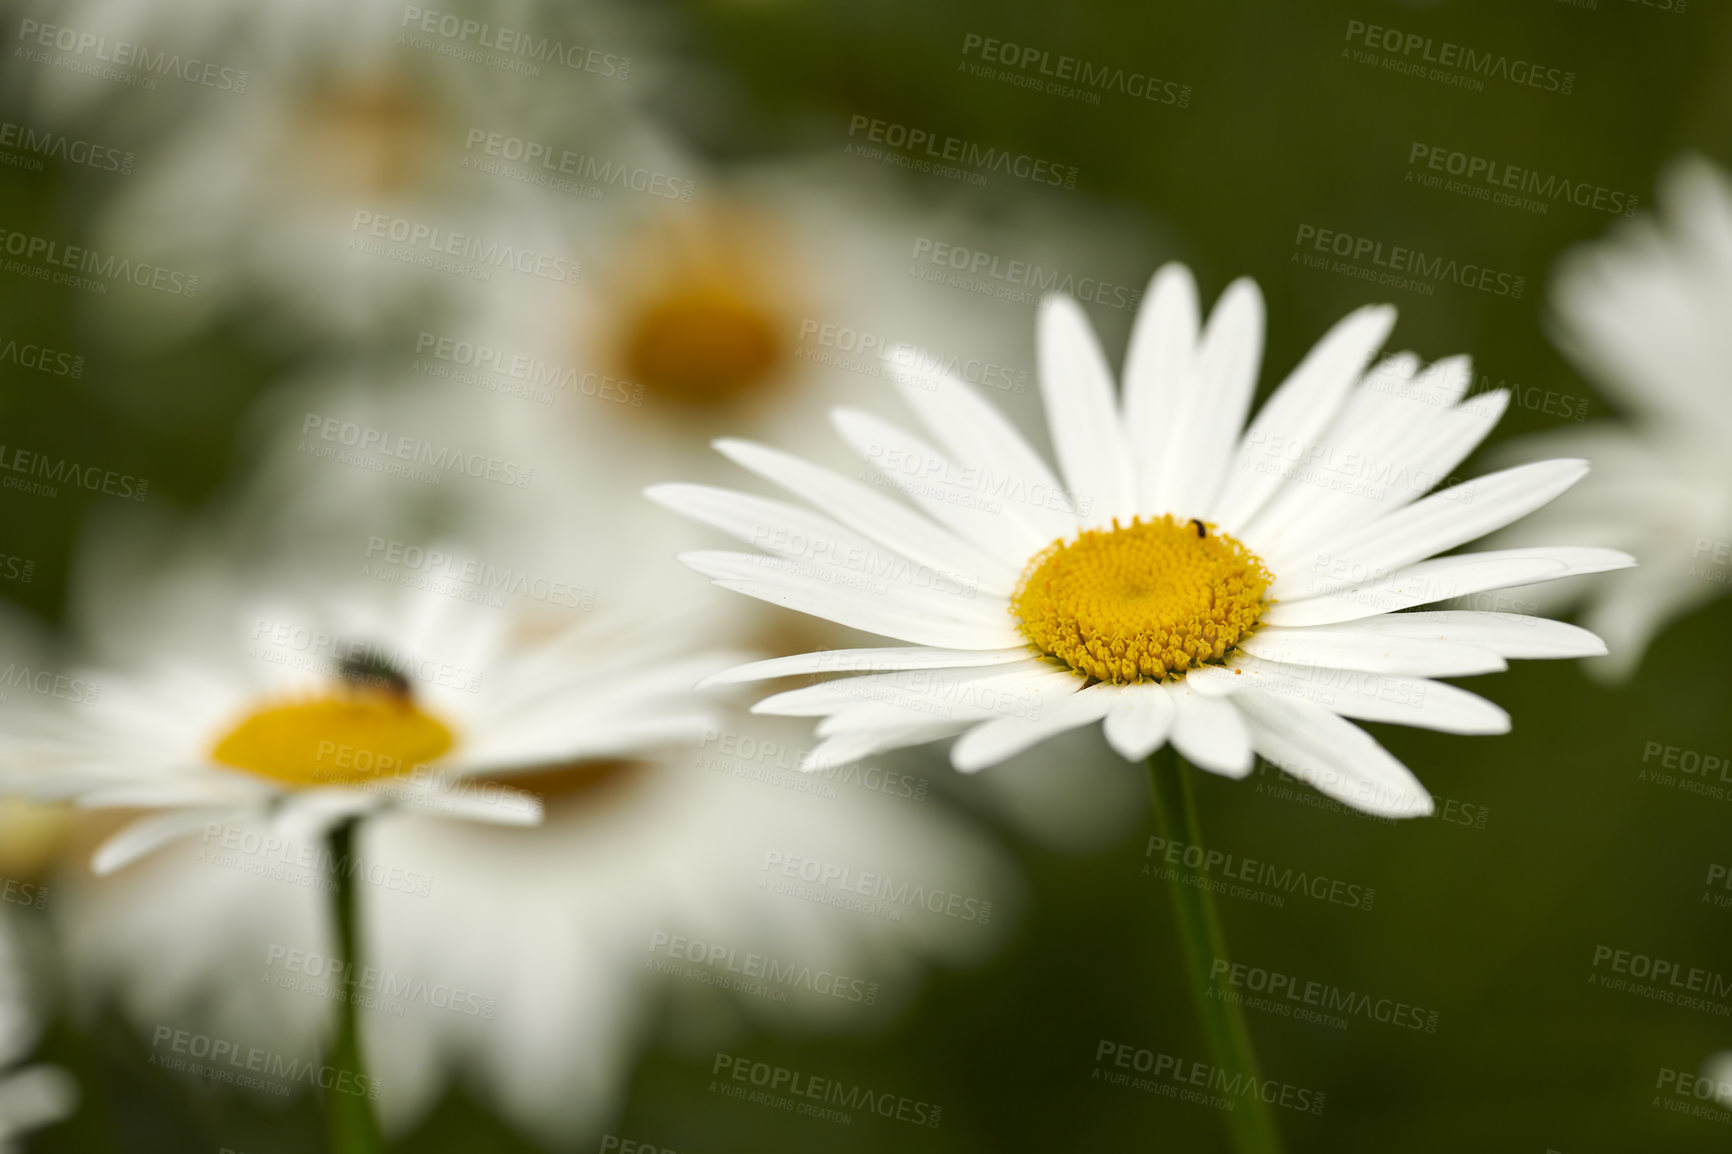 Buy stock photo Closeup of white Marguerite daisies growing in medicinal horticulture or cultivated field for chamomile tea leaves harvest. Argyranthemum frutescens flowers blooming in a home garden or remote meadow